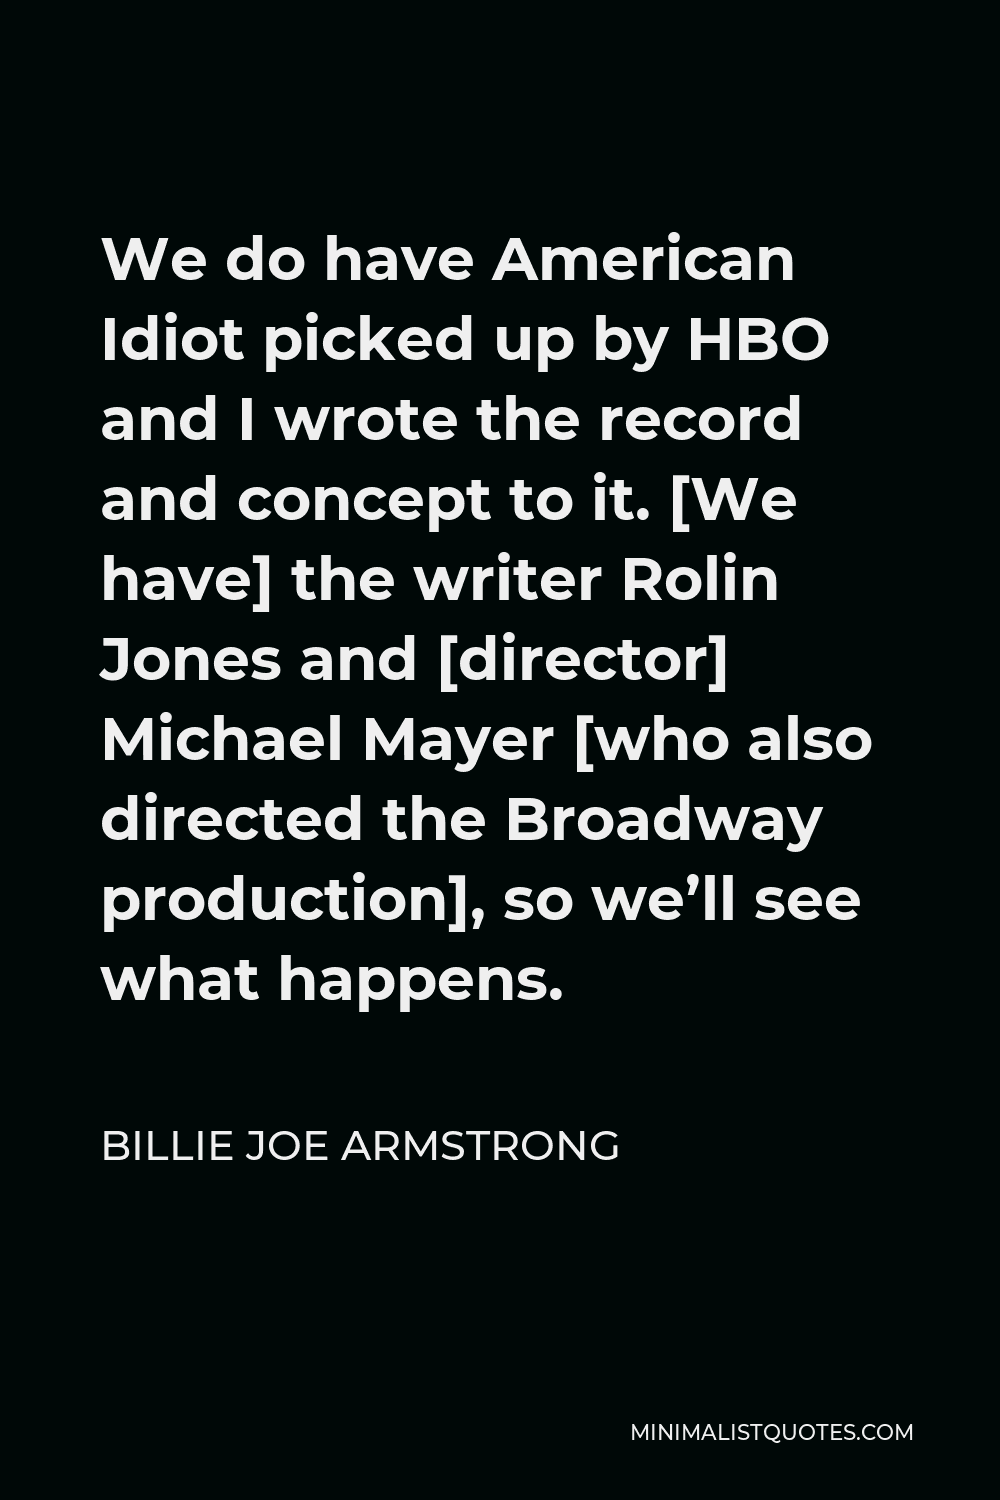 Billie Joe Armstrong Quote - We do have American Idiot picked up by HBO and I wrote the record and concept to it. [We have] the writer Rolin Jones and [director] Michael Mayer [who also directed the Broadway production], so we’ll see what happens.